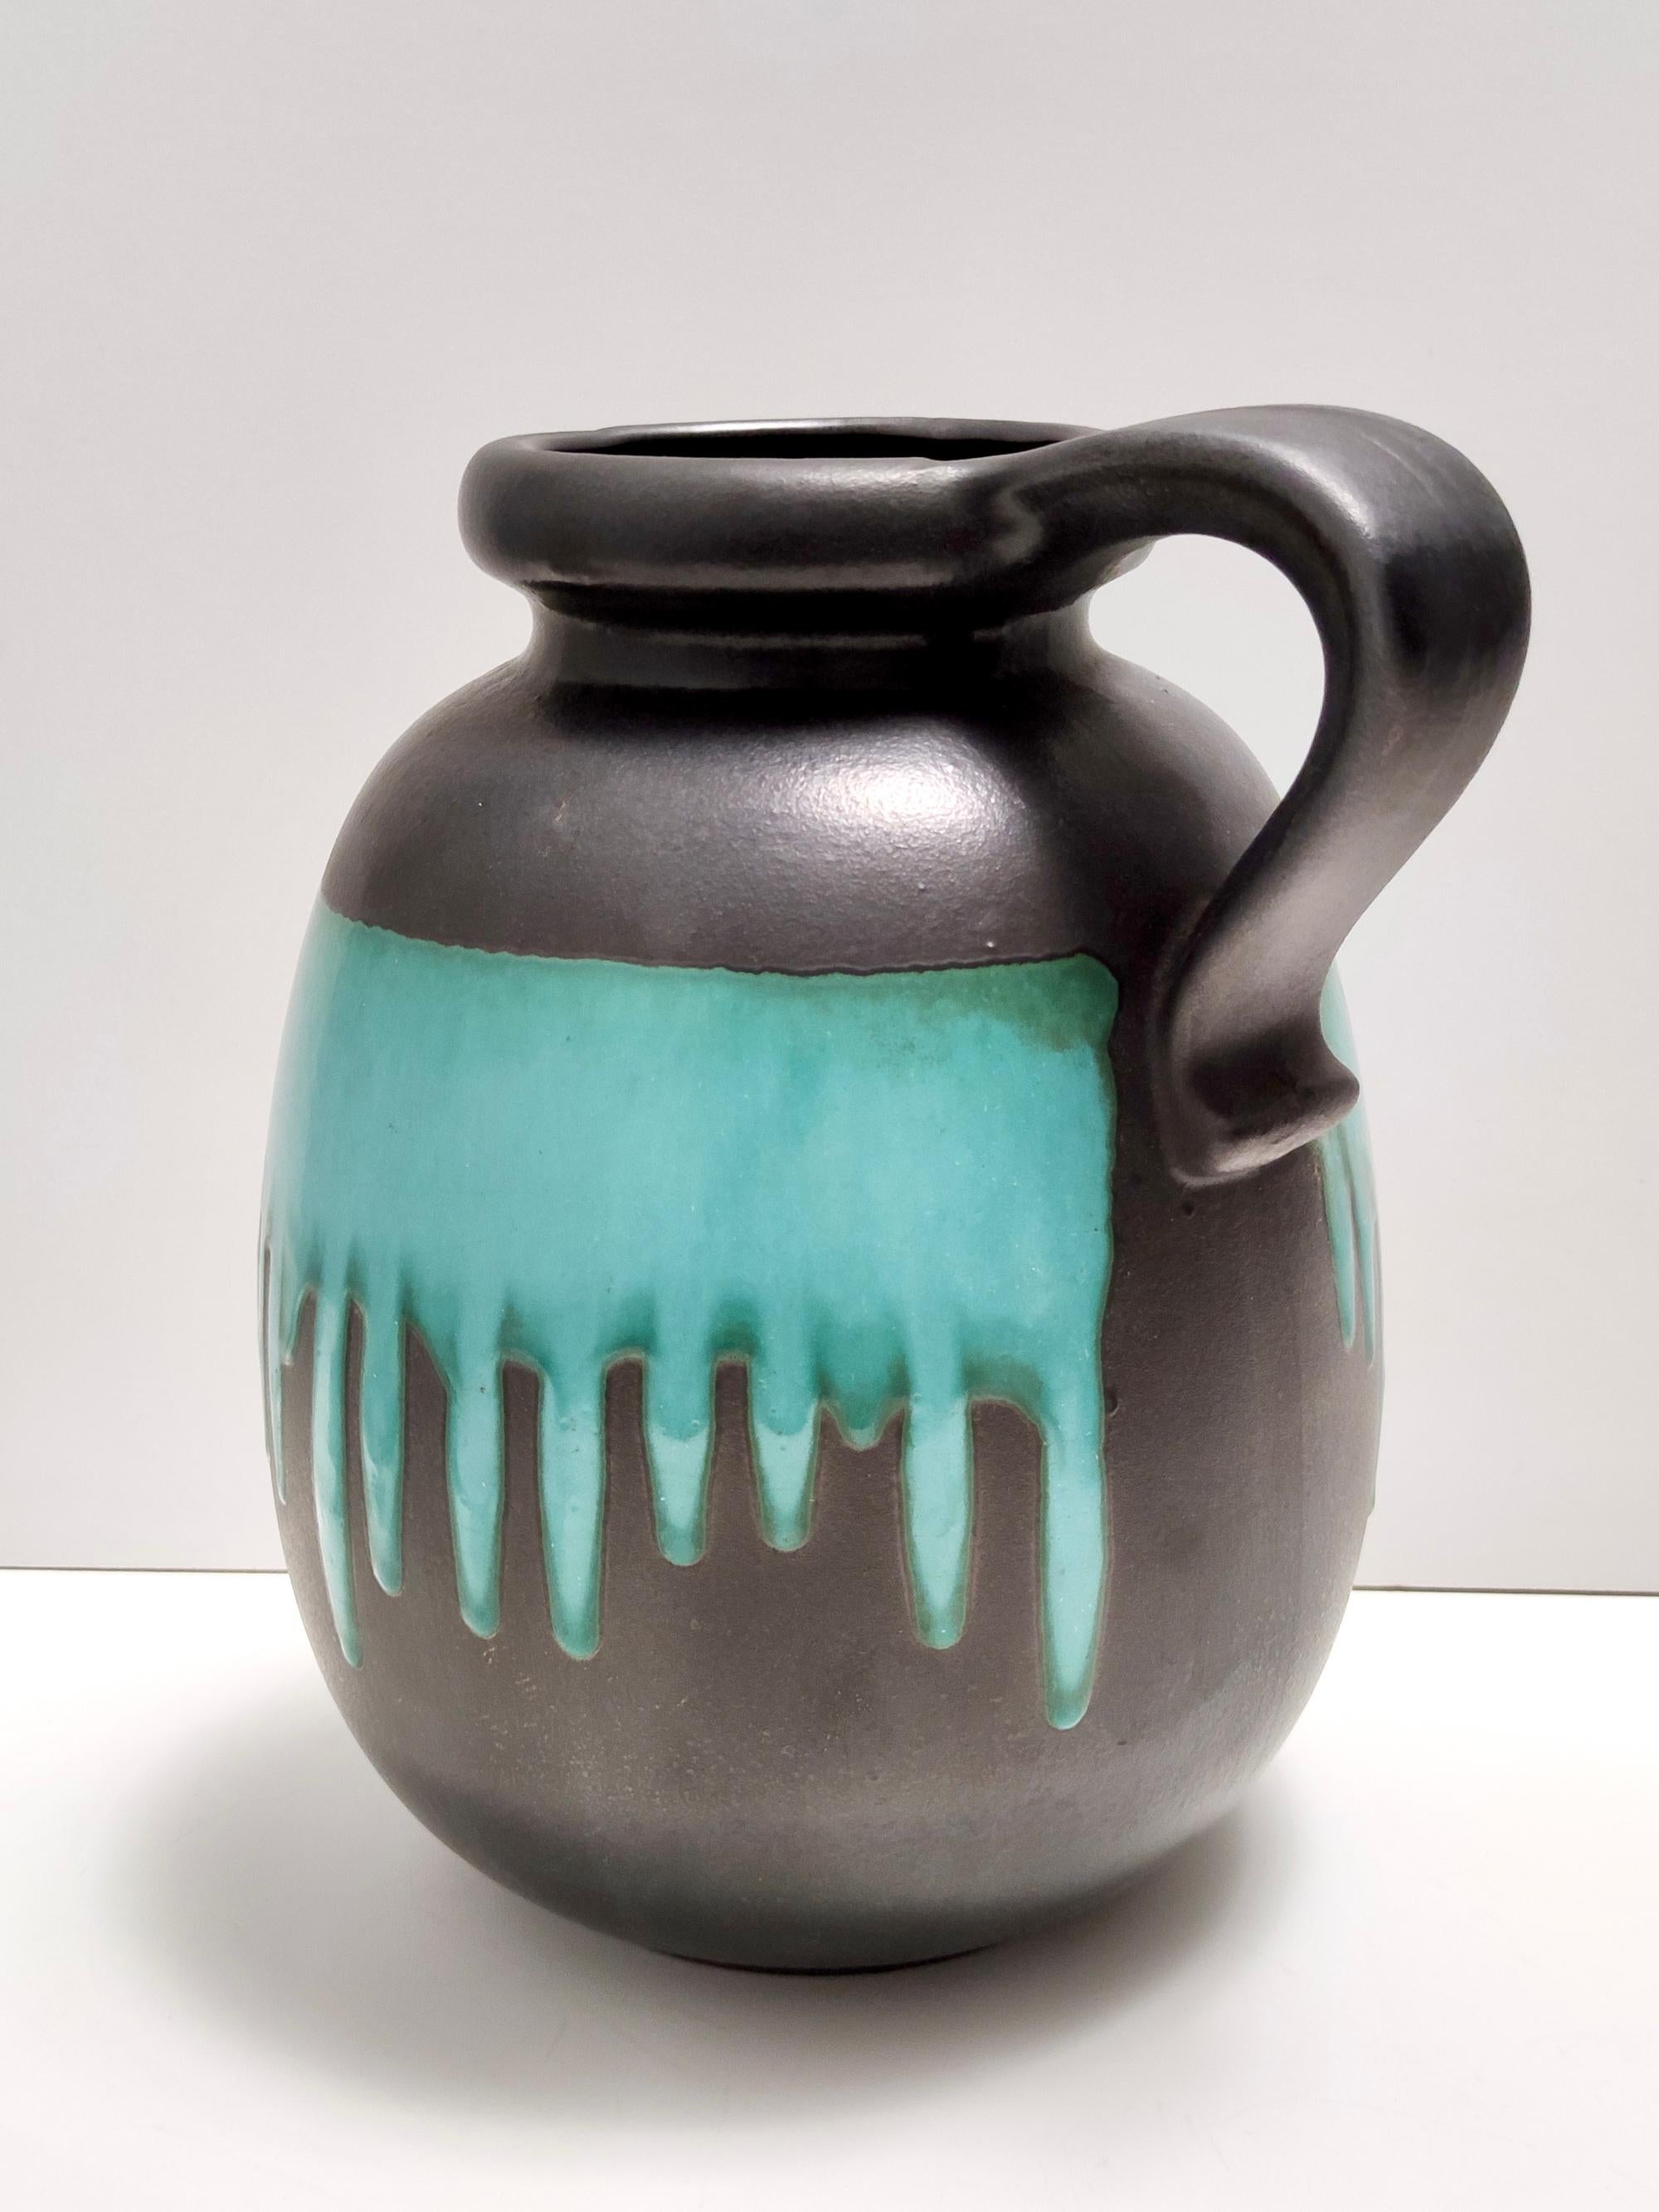 Hand-Crafted Vintage Black and Teal Fat Lava Ceramic Vase Multi-Color 484-30 Scheurich WGP For Sale